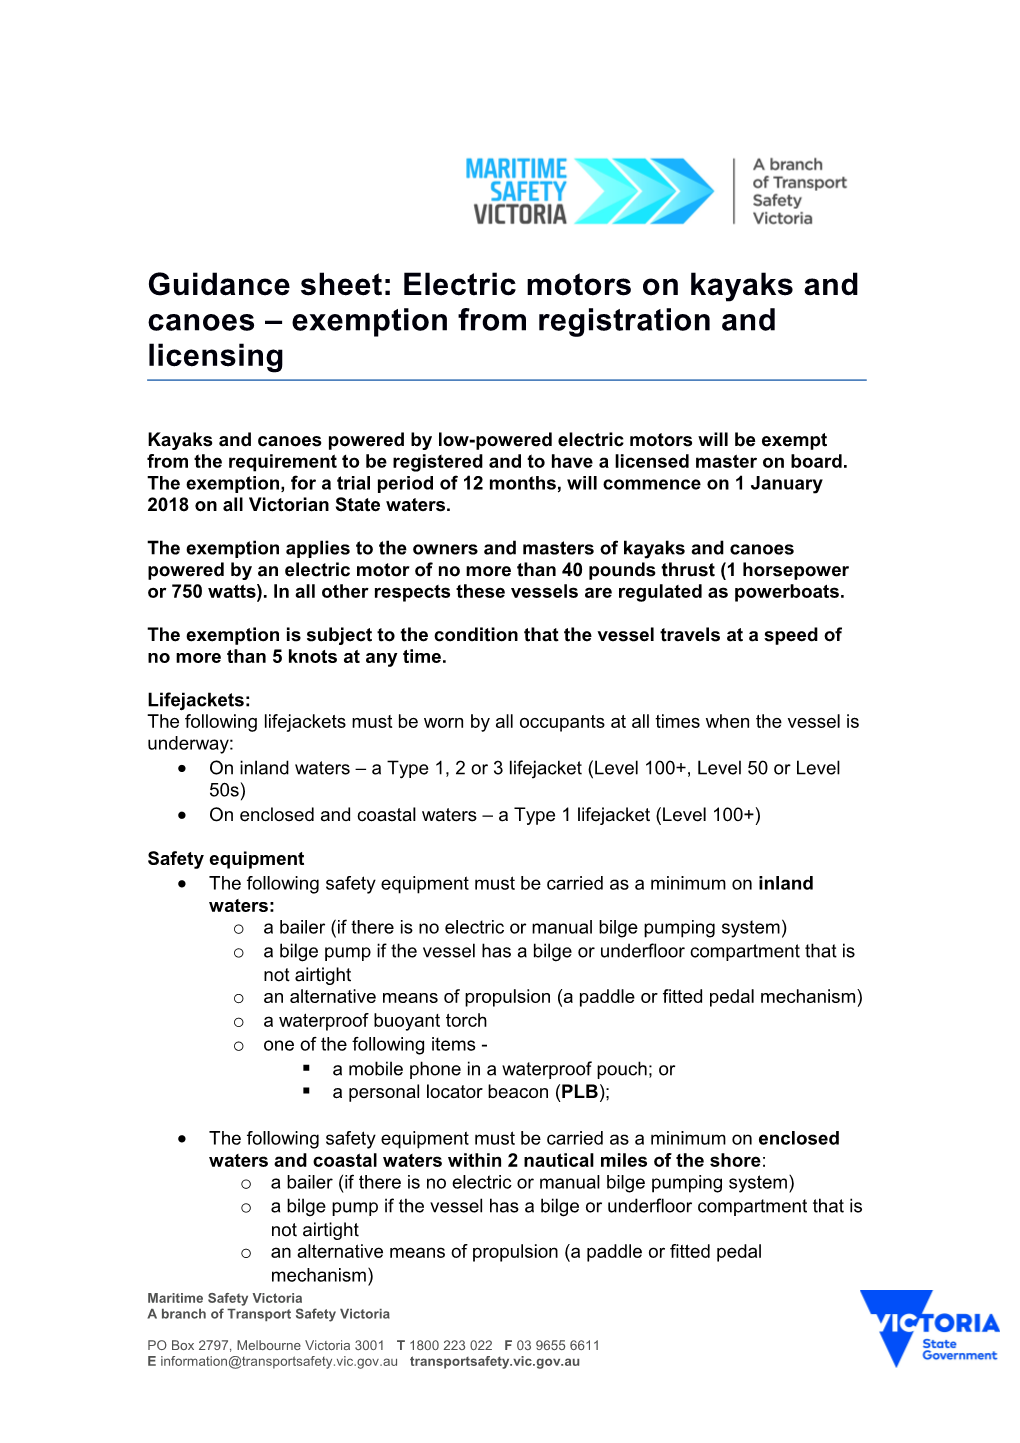 Guidance Sheet: Electric Motors on Kayaks and Canoes Exemption from Registration and Licensing